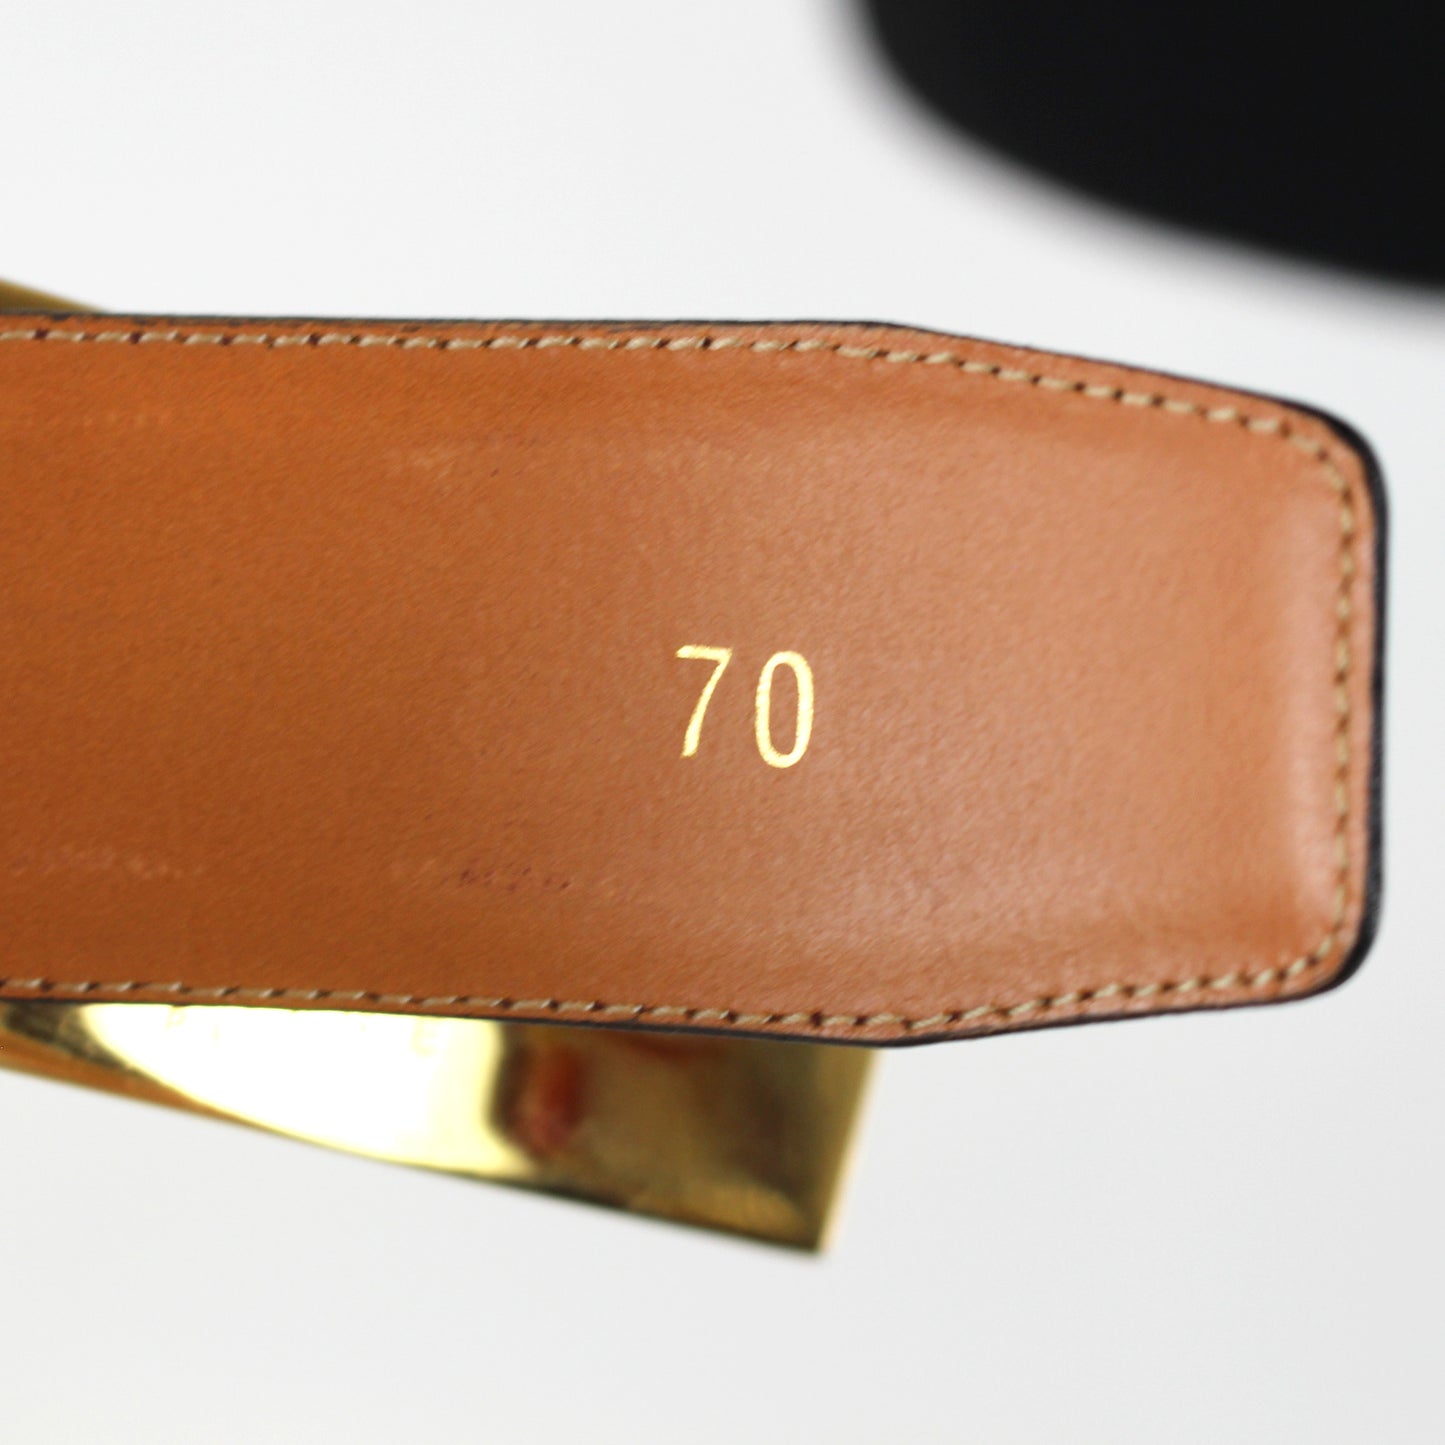 Celine Patent Leather Gold Carriage Belt